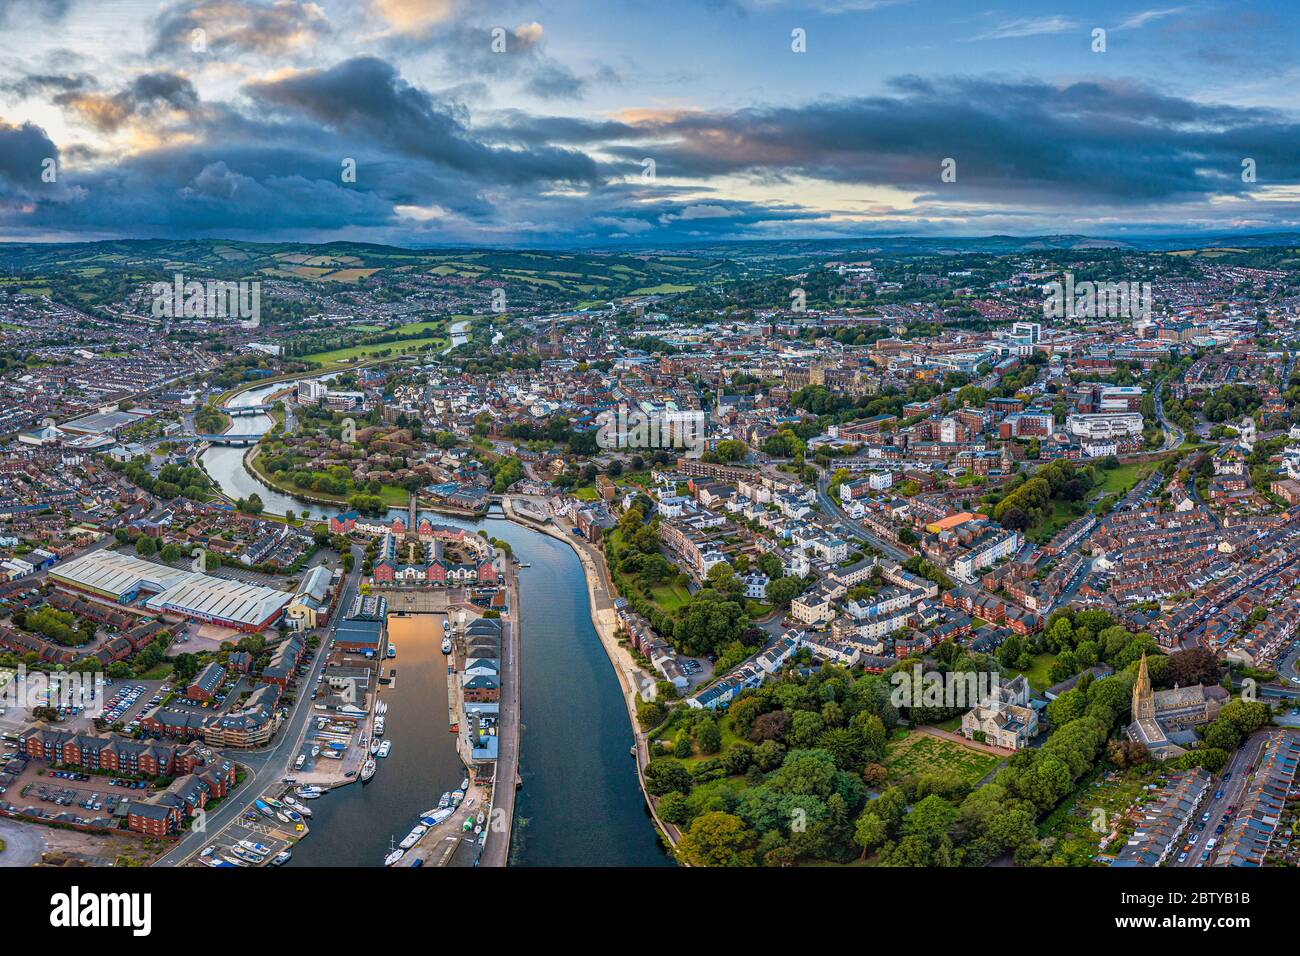 Aerial view over Exeter city centre and the River Exe, Exeter, Devon, England, United Kingdom, Europe Stock Photo